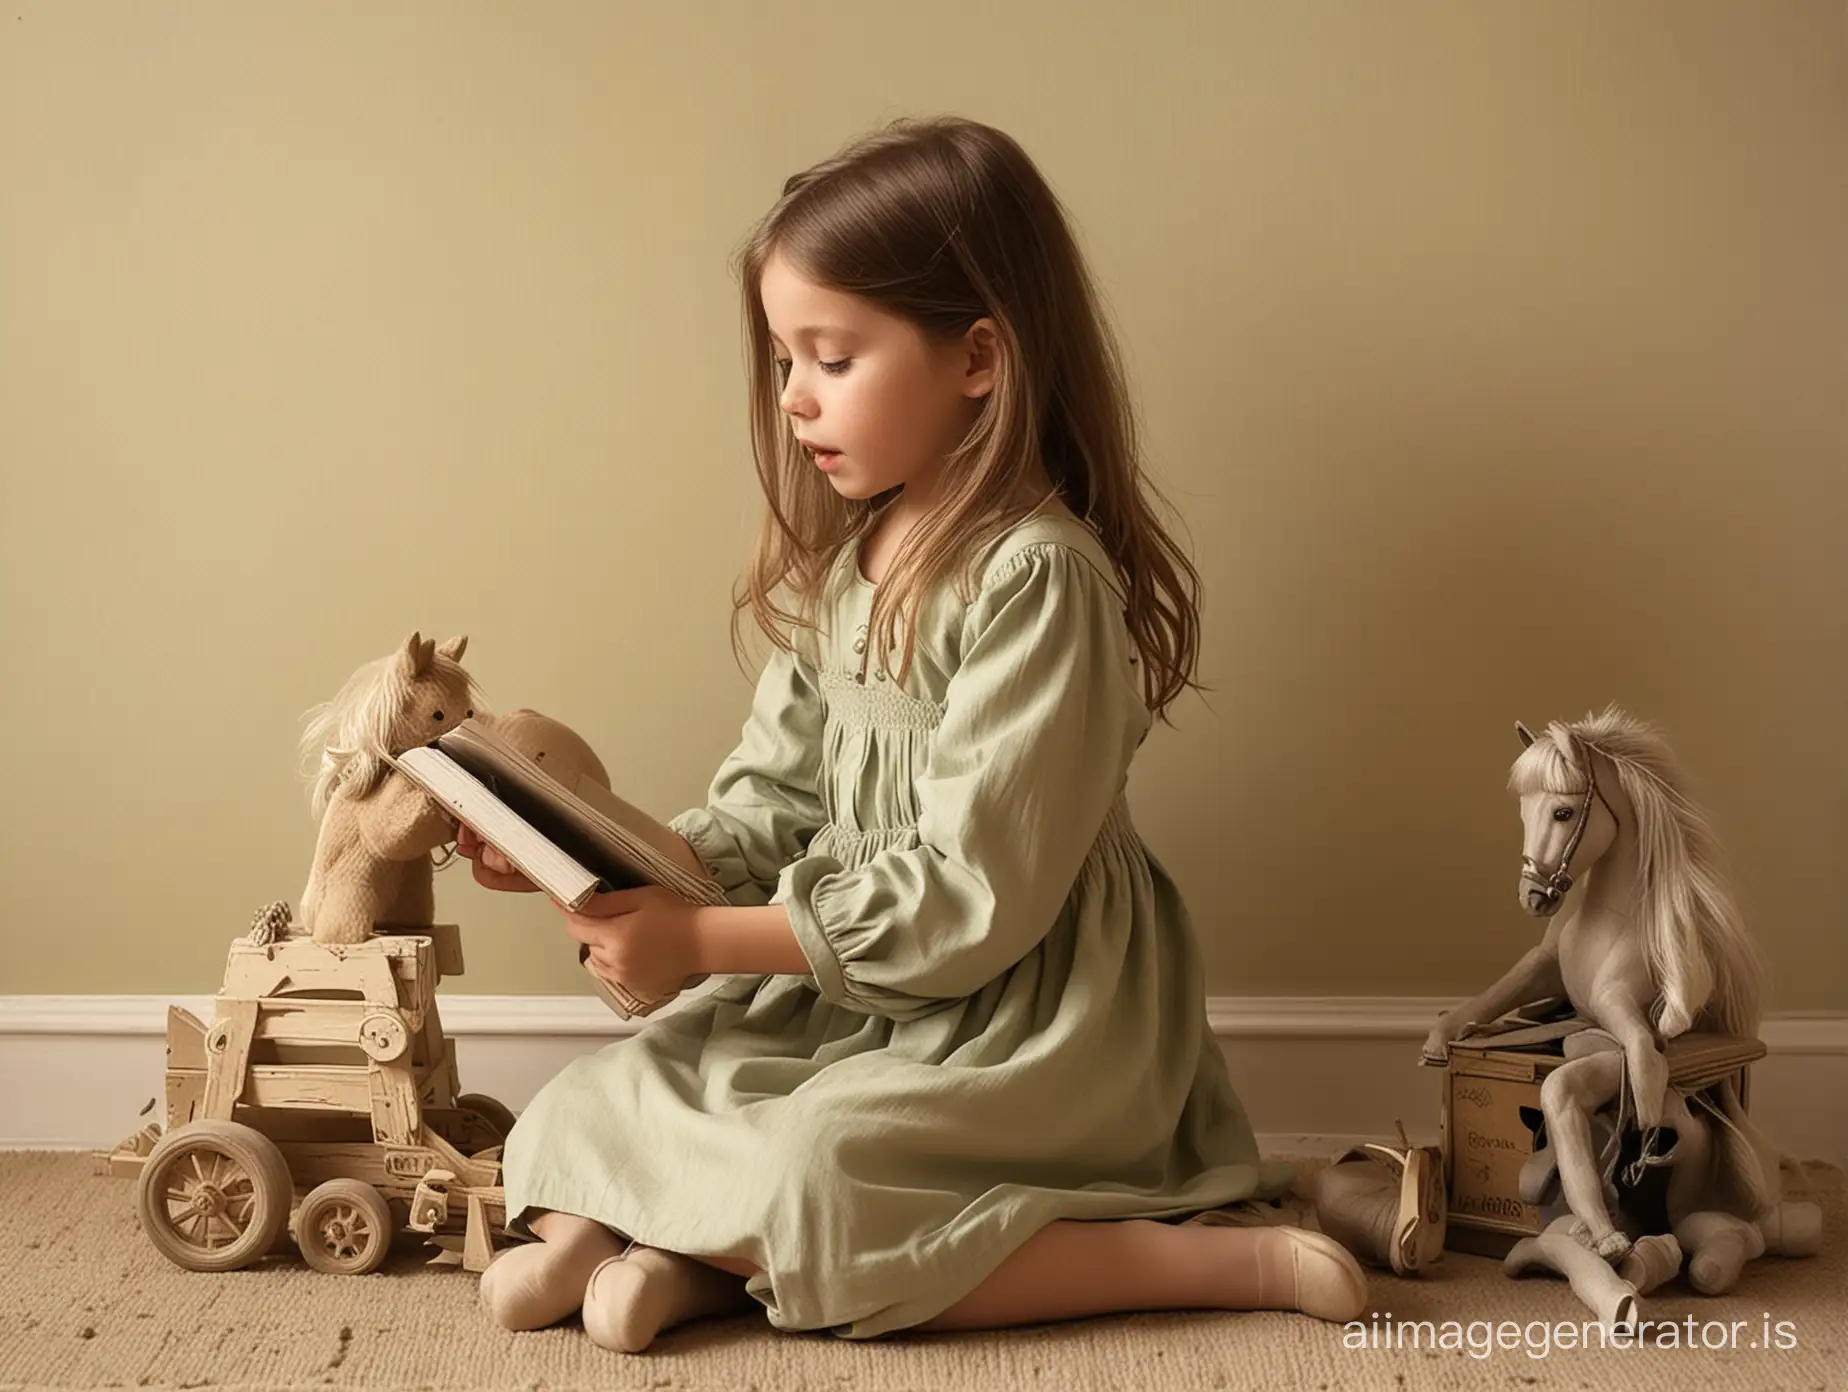 A girl, about 6 years old, with loose hair on her shoulders, sitting on the ground. Profile shot, positioned to the left of the image. She is engrossed in playing with old dusty toys, including dolls, music boxes, puppets, and rocking horses. She has a book in her hand. 
Style: Detailed Photorealistic, Nostalgic and melancholic atmosphere, Warm and soft, dim light. Soft and dusty colors predominate, such as brown, beige, and sage green. Warm and welcoming atmosphere. Shadows are soft and diffuse.